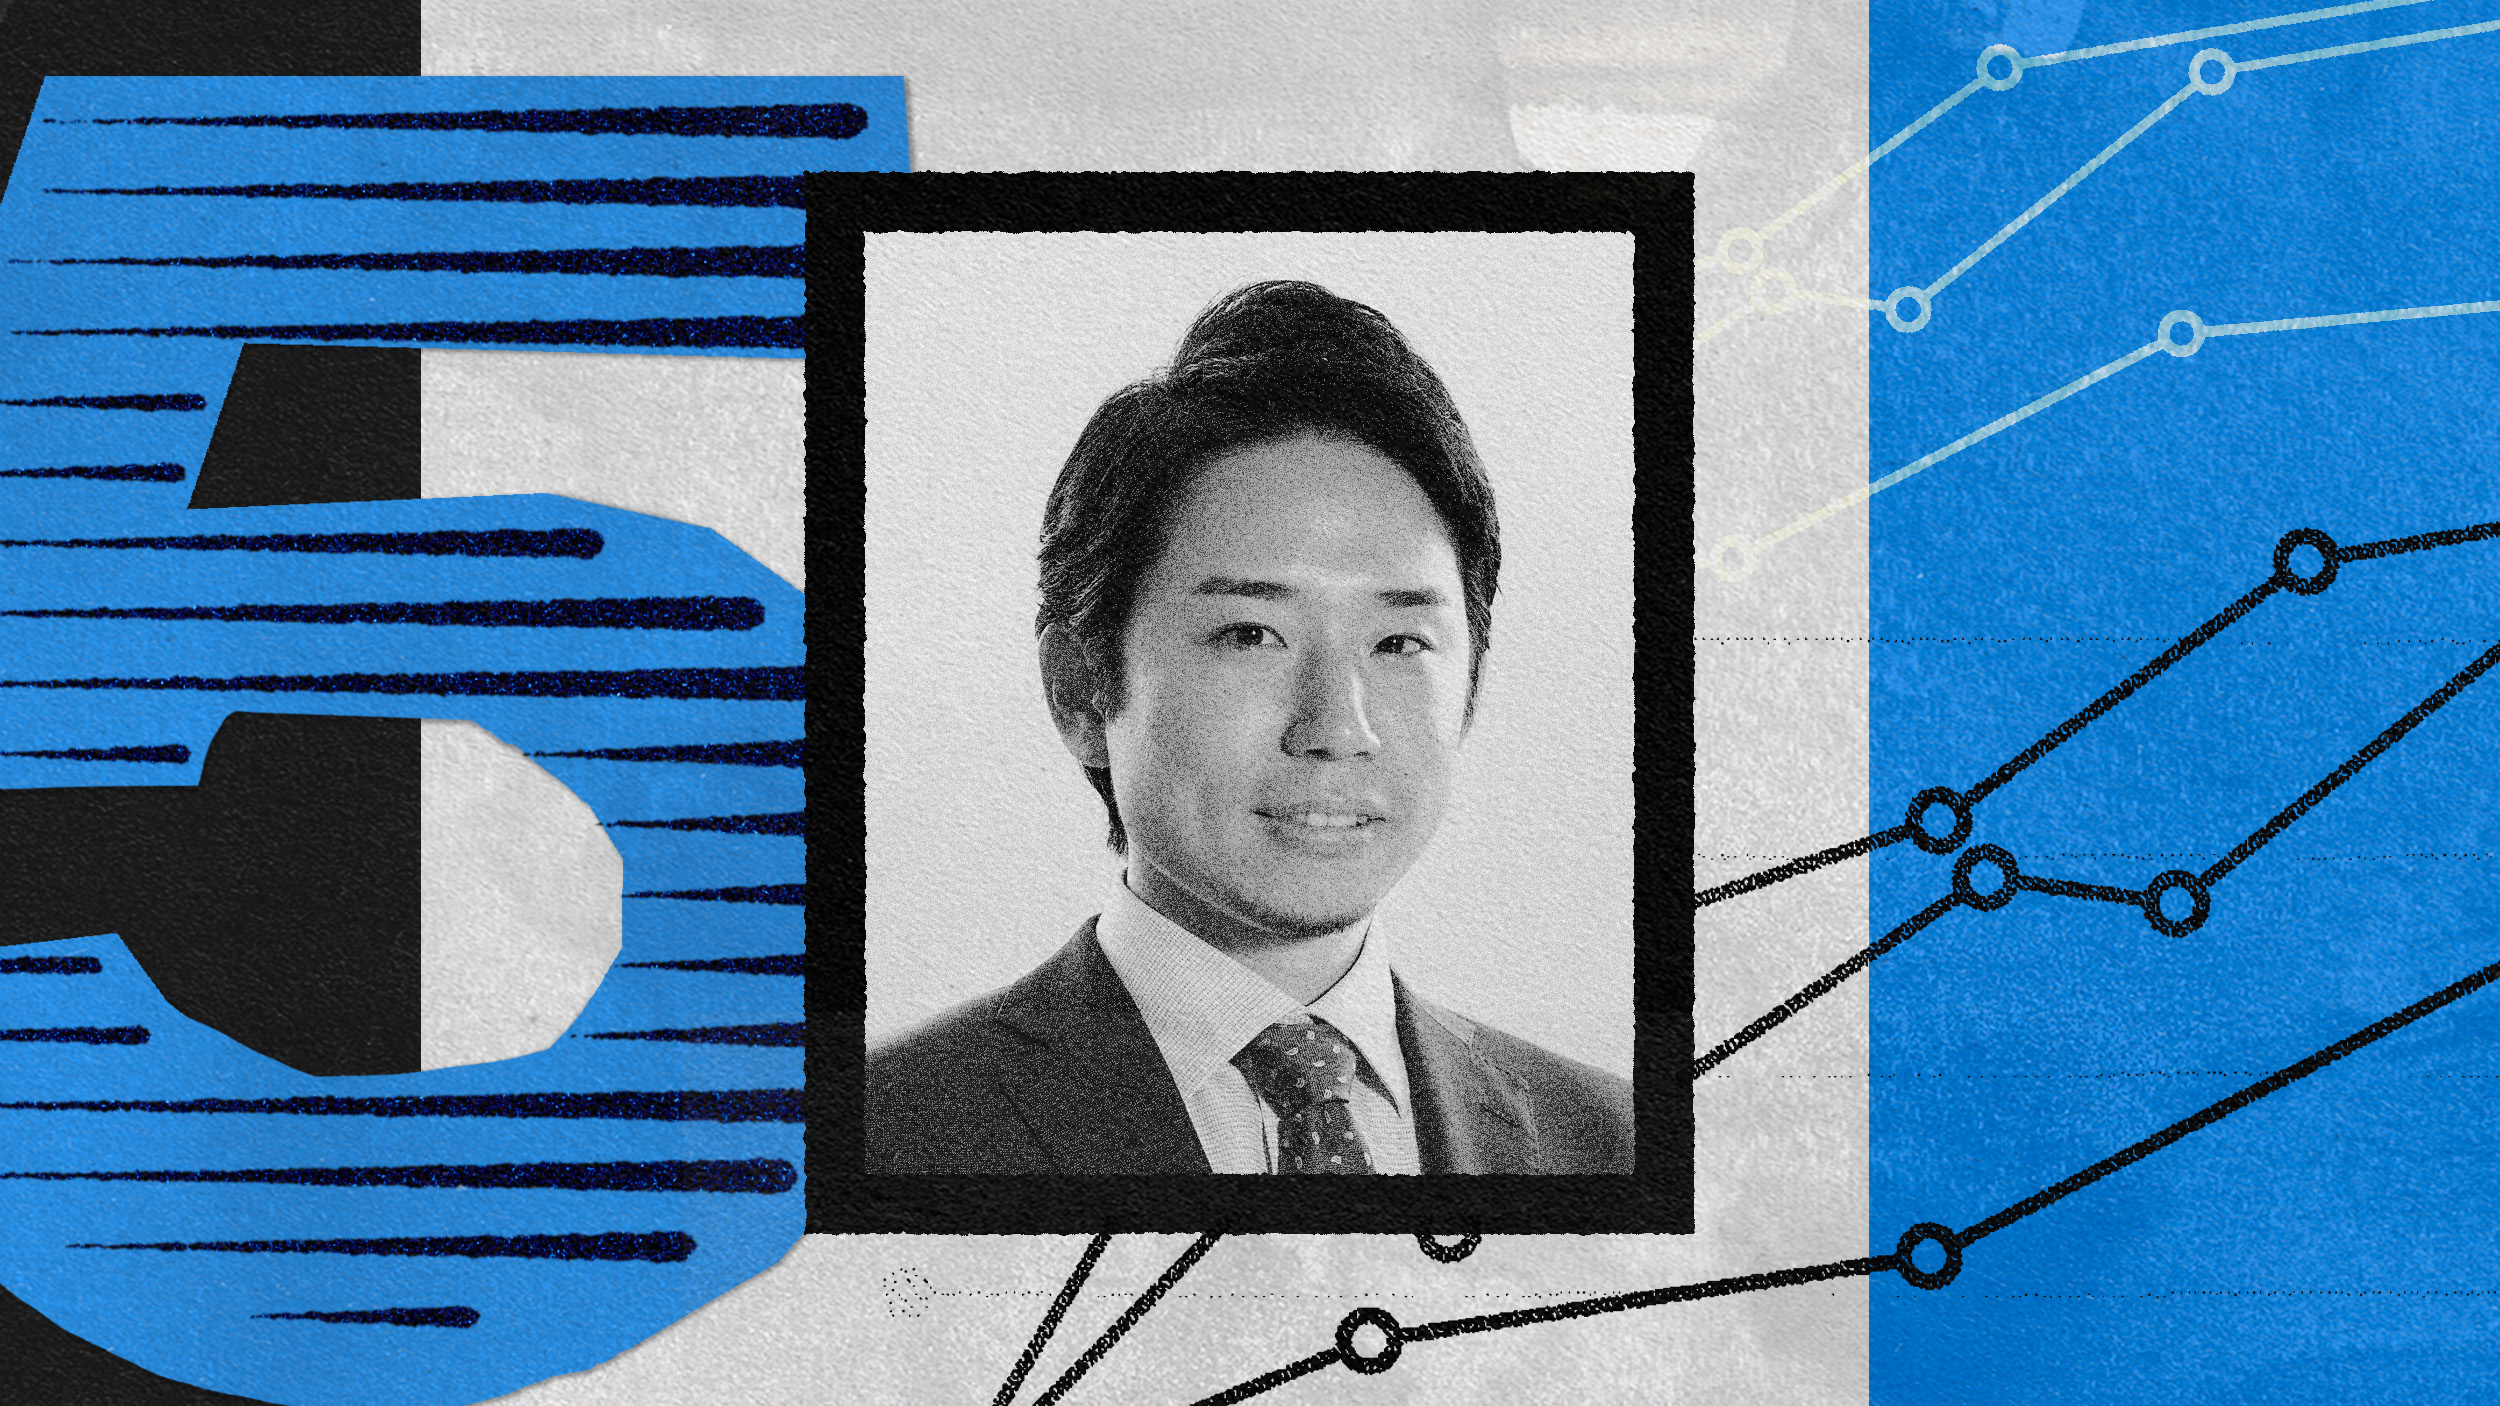 A grayscale business portrait of a young CEO in a suit and tie framed over a blue and gray background with abstract charts and the number 5, symbolizing key lessons integrated into the design.